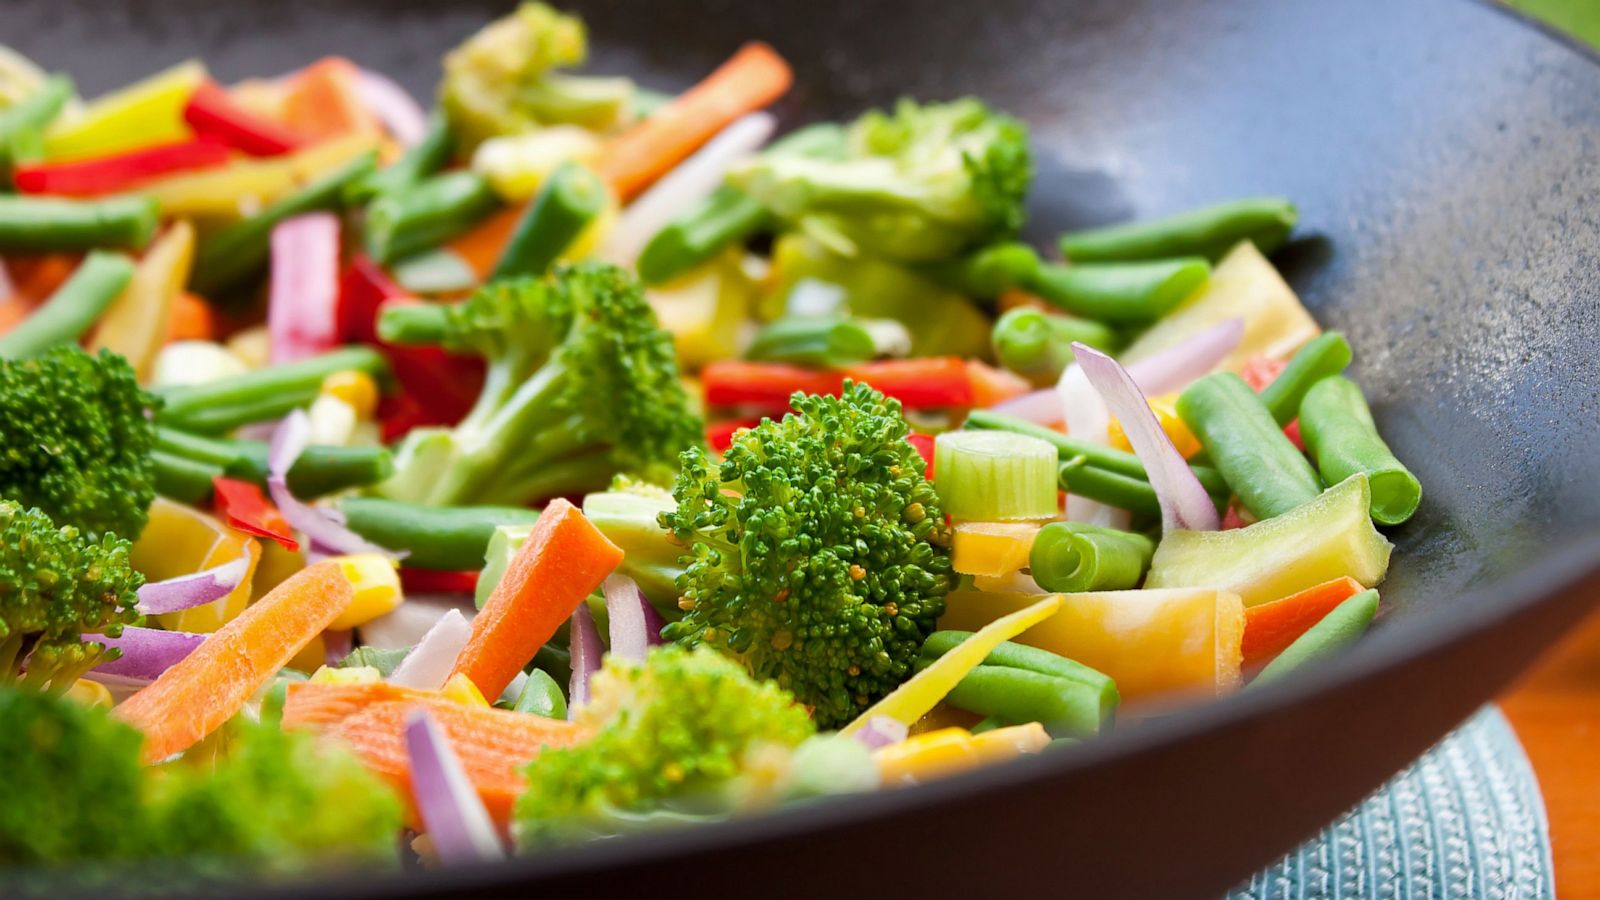 DOC: THE PROS AND CONS OF VEGETARIAN DIETS